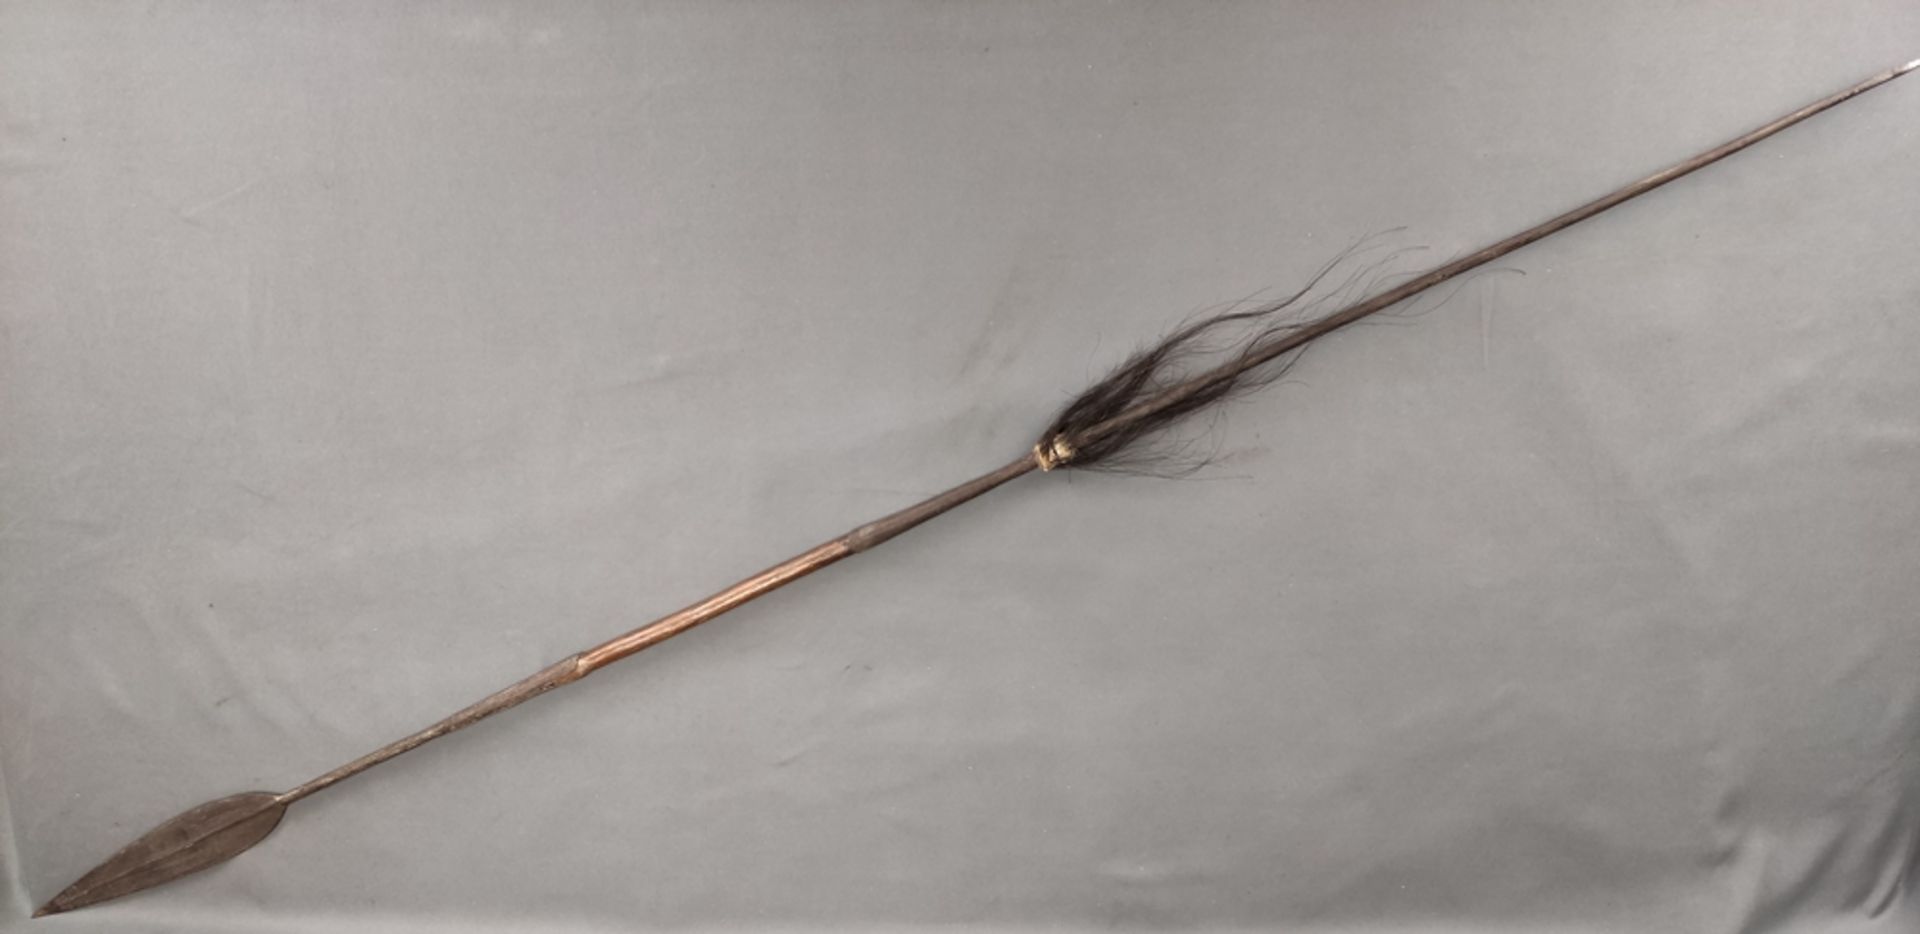 Spear with metal tip, middle part made of wood, lower part made of metal, decoration with hair, - Image 3 of 5